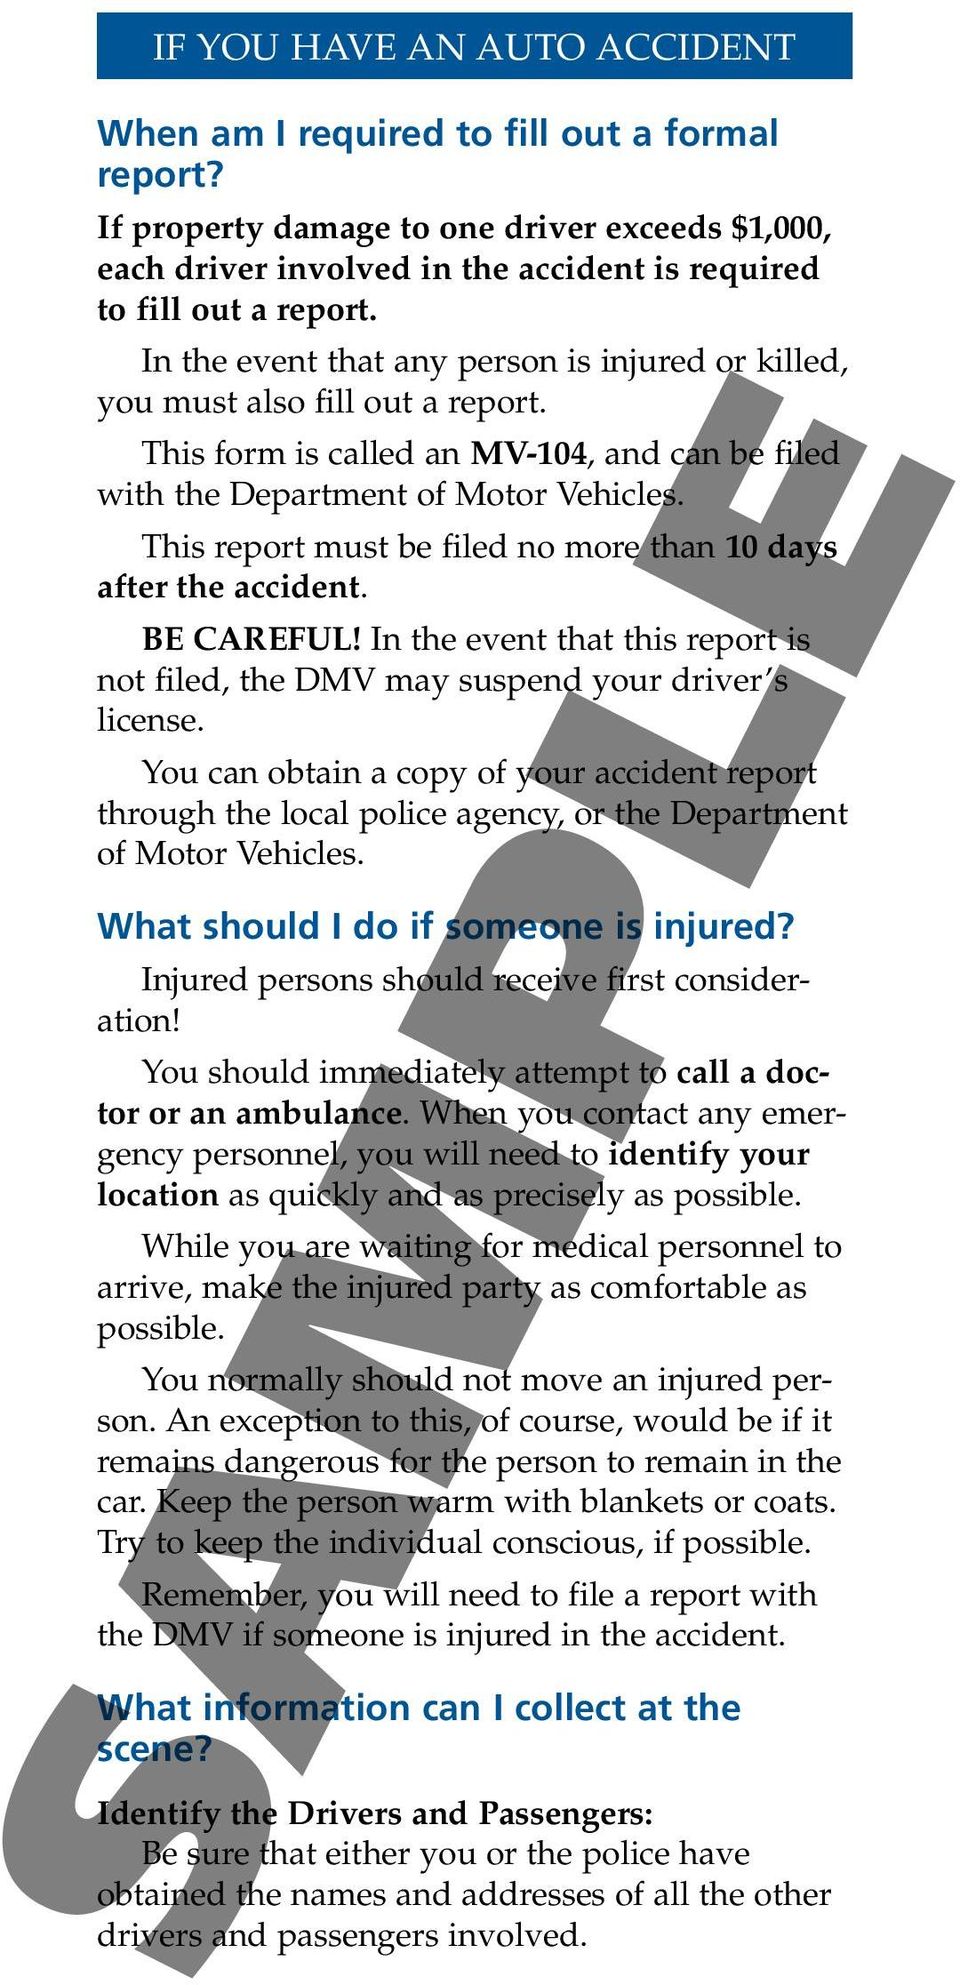 This report must be filed no more than 10 days after the accident. BE CAREFUL! In the event that this report is not filed, the DMV may suspend your driver s license.